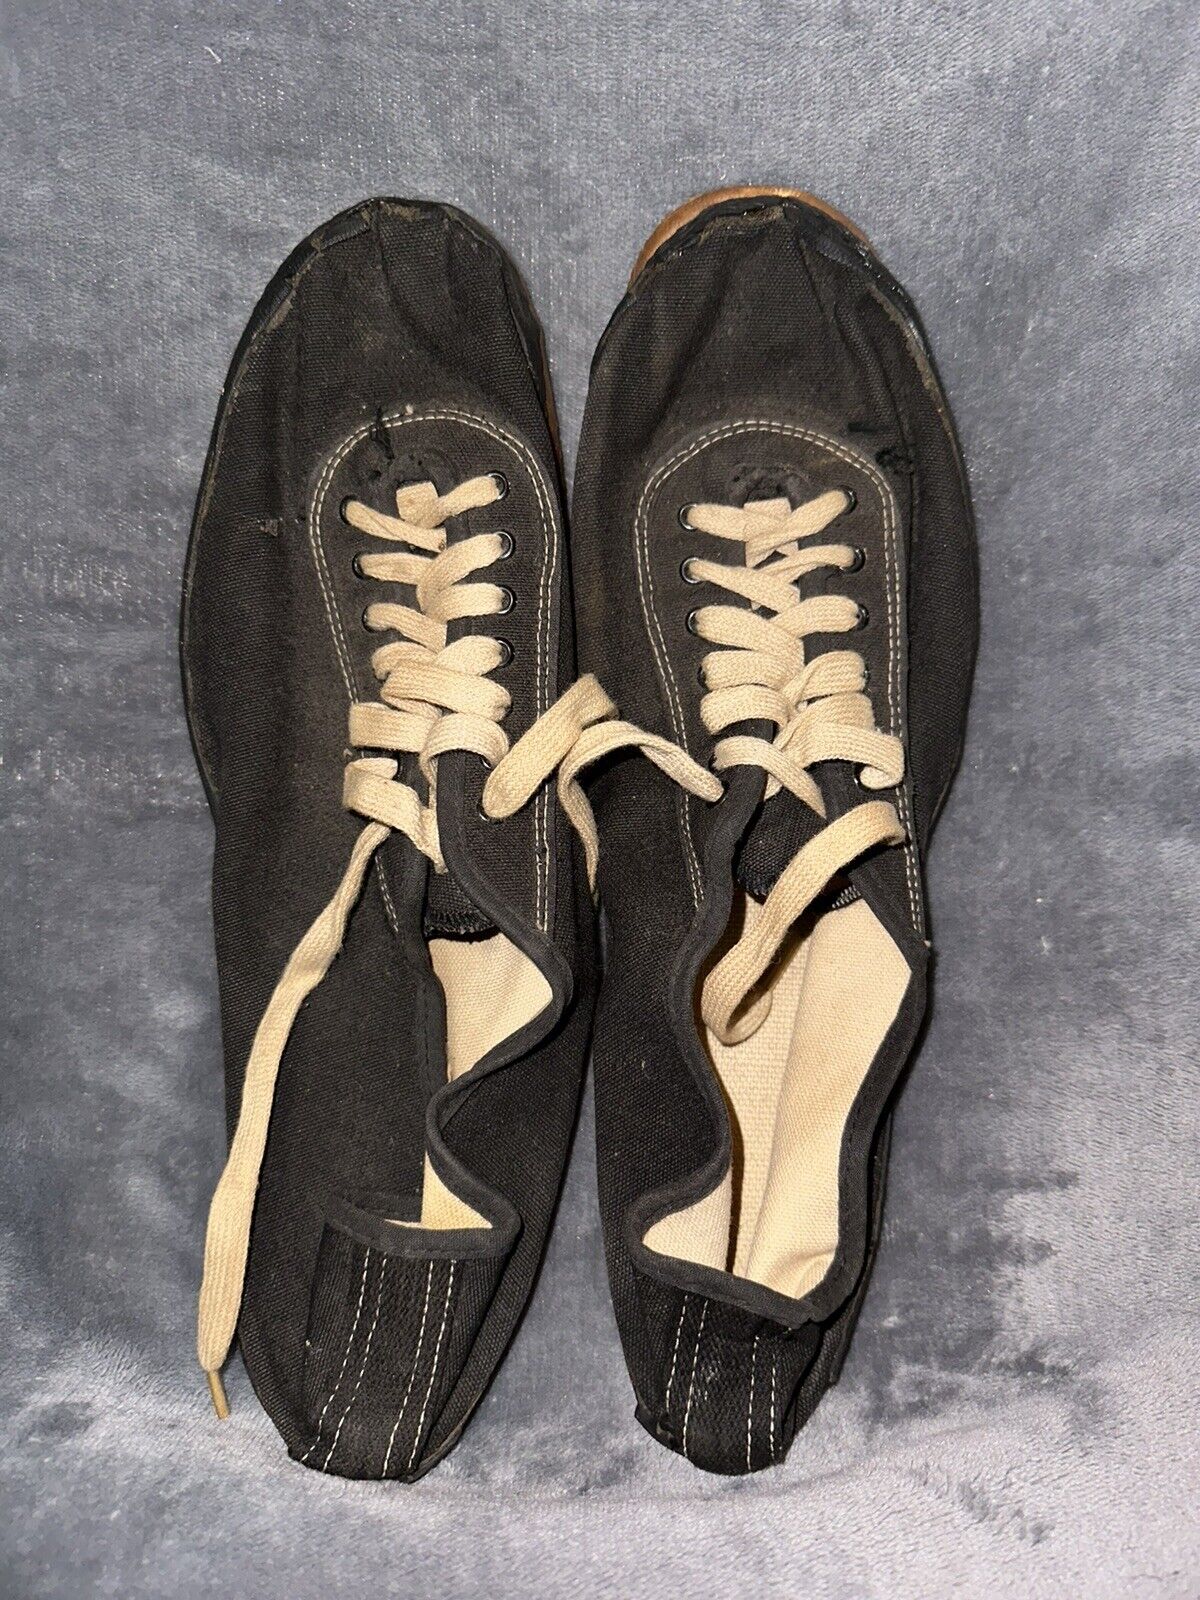 **RARE** LATE 1950’s / EARLY 1960’s Converse Chuck Taylor Athletic TRACK Shoes